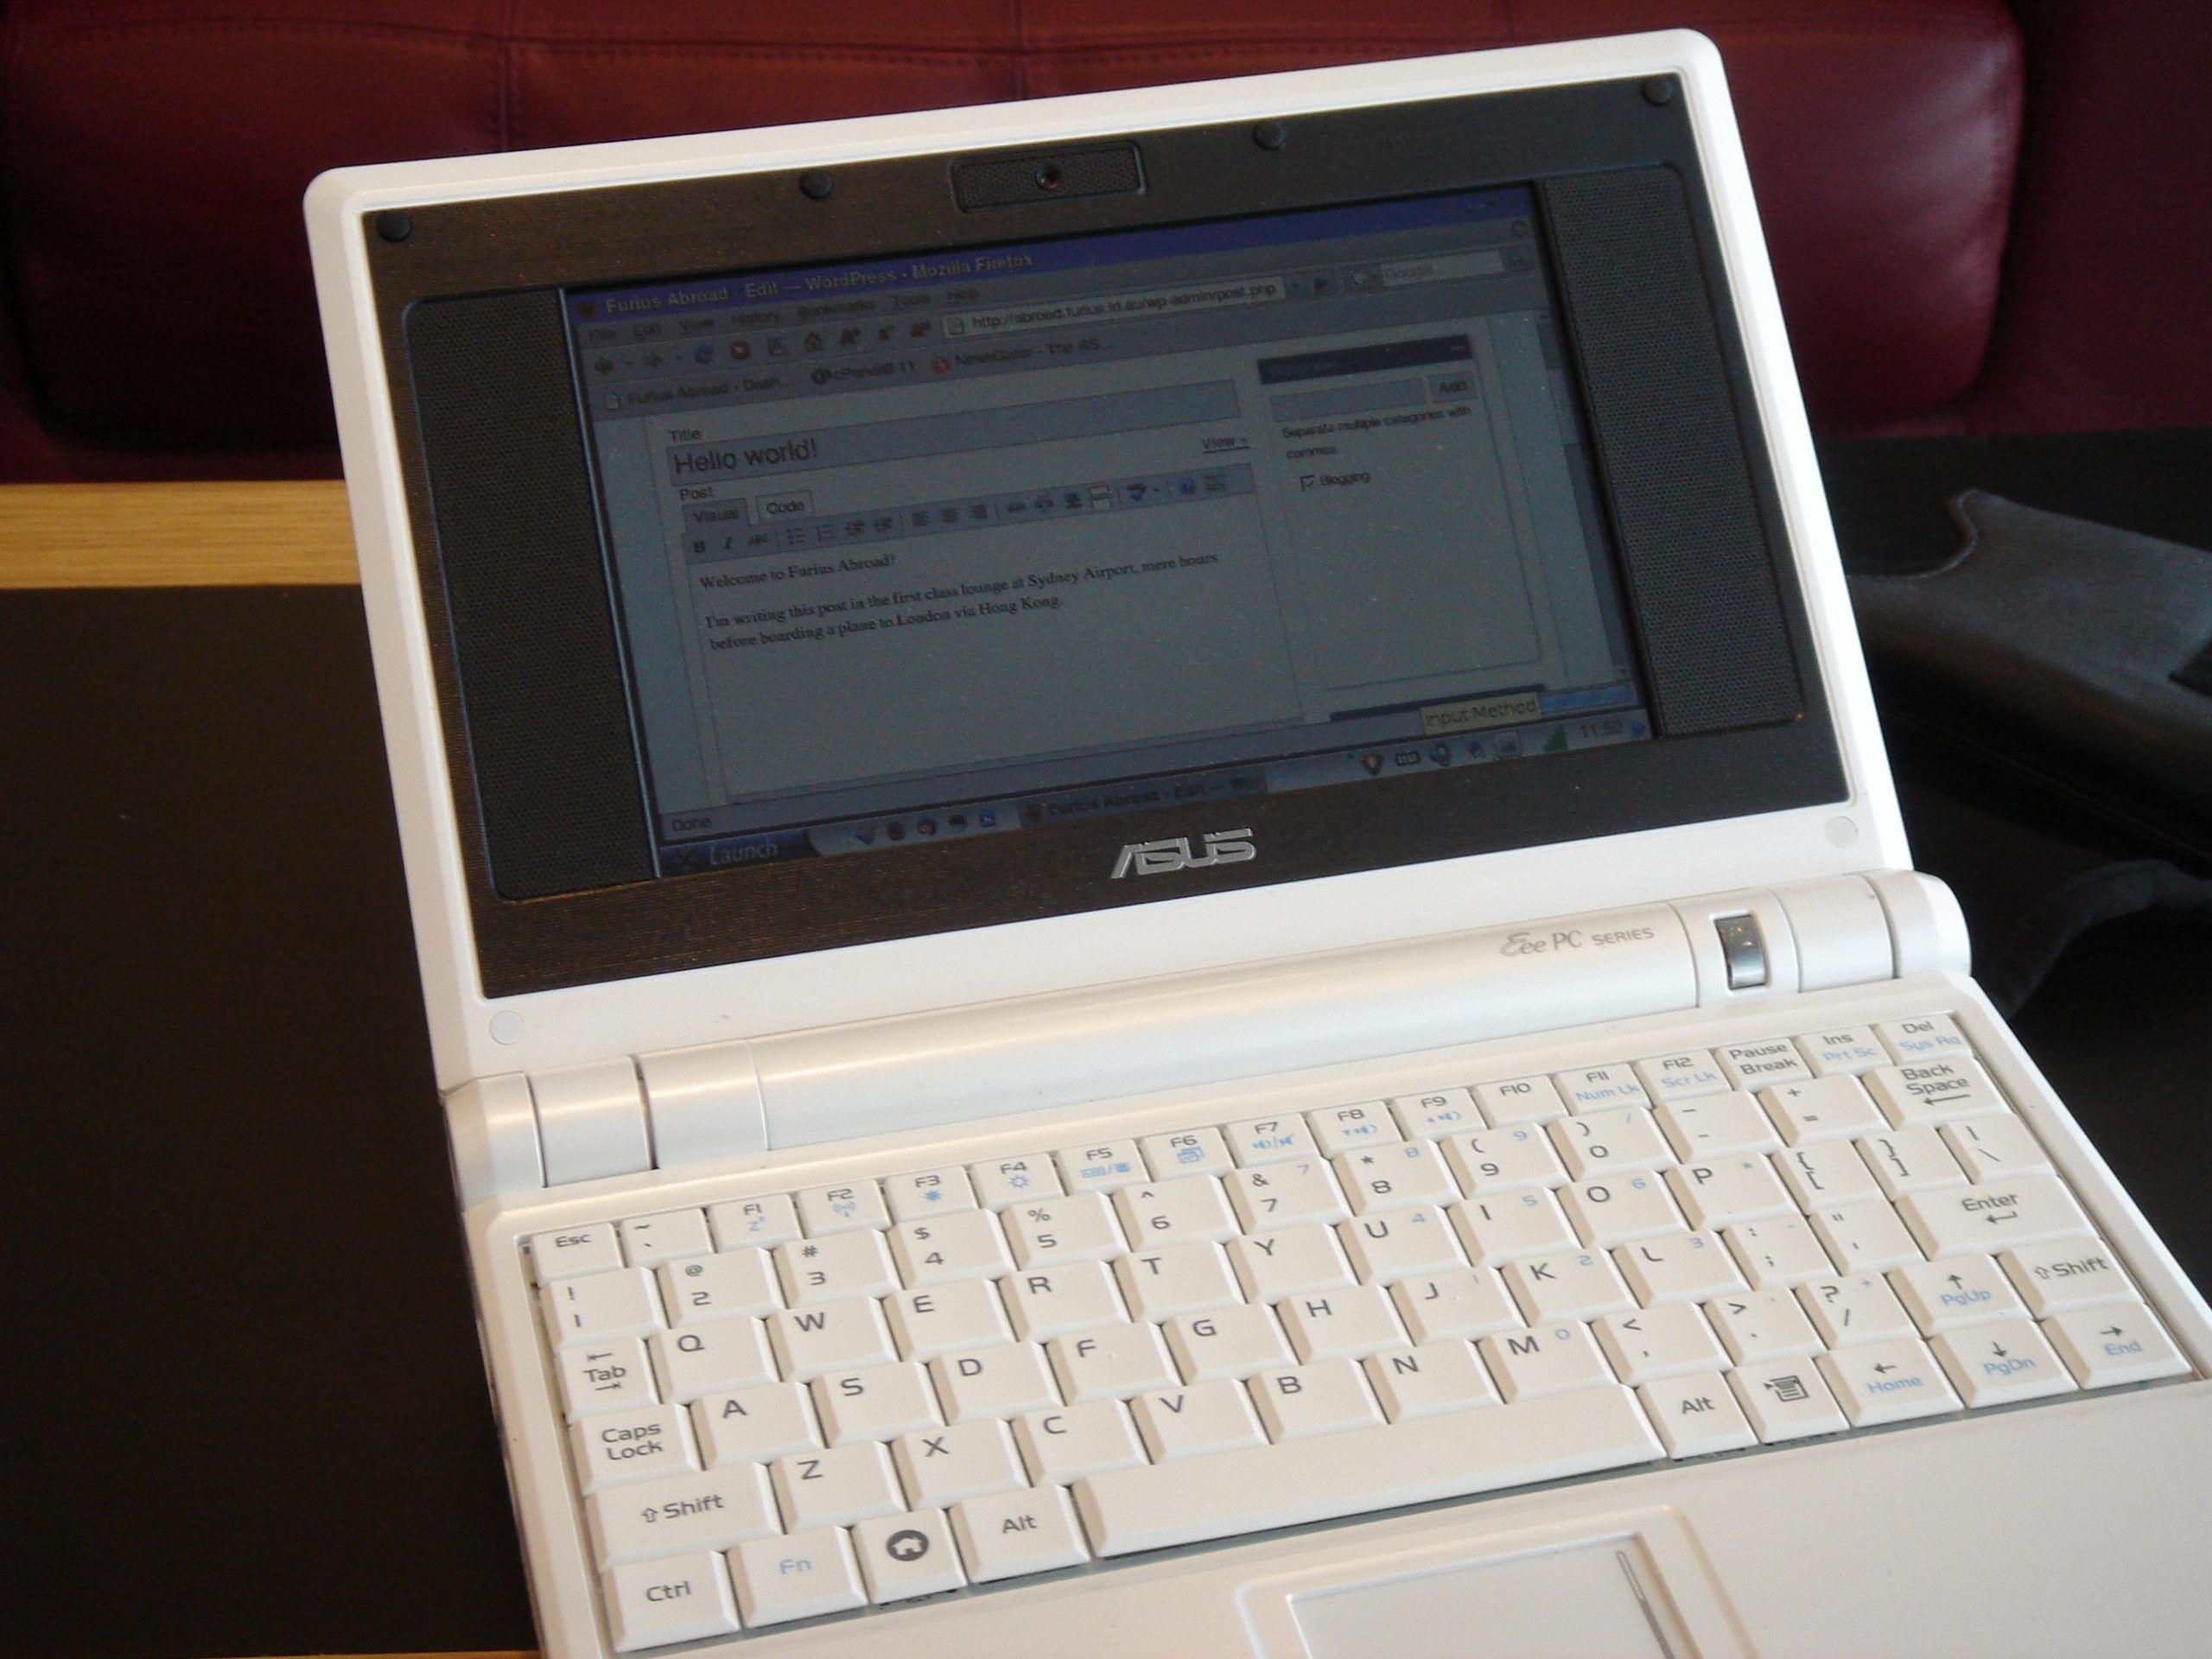 A tiny white plastic laptop. The browser is open on the WordPress admin page of this blog, showing a post being edited.